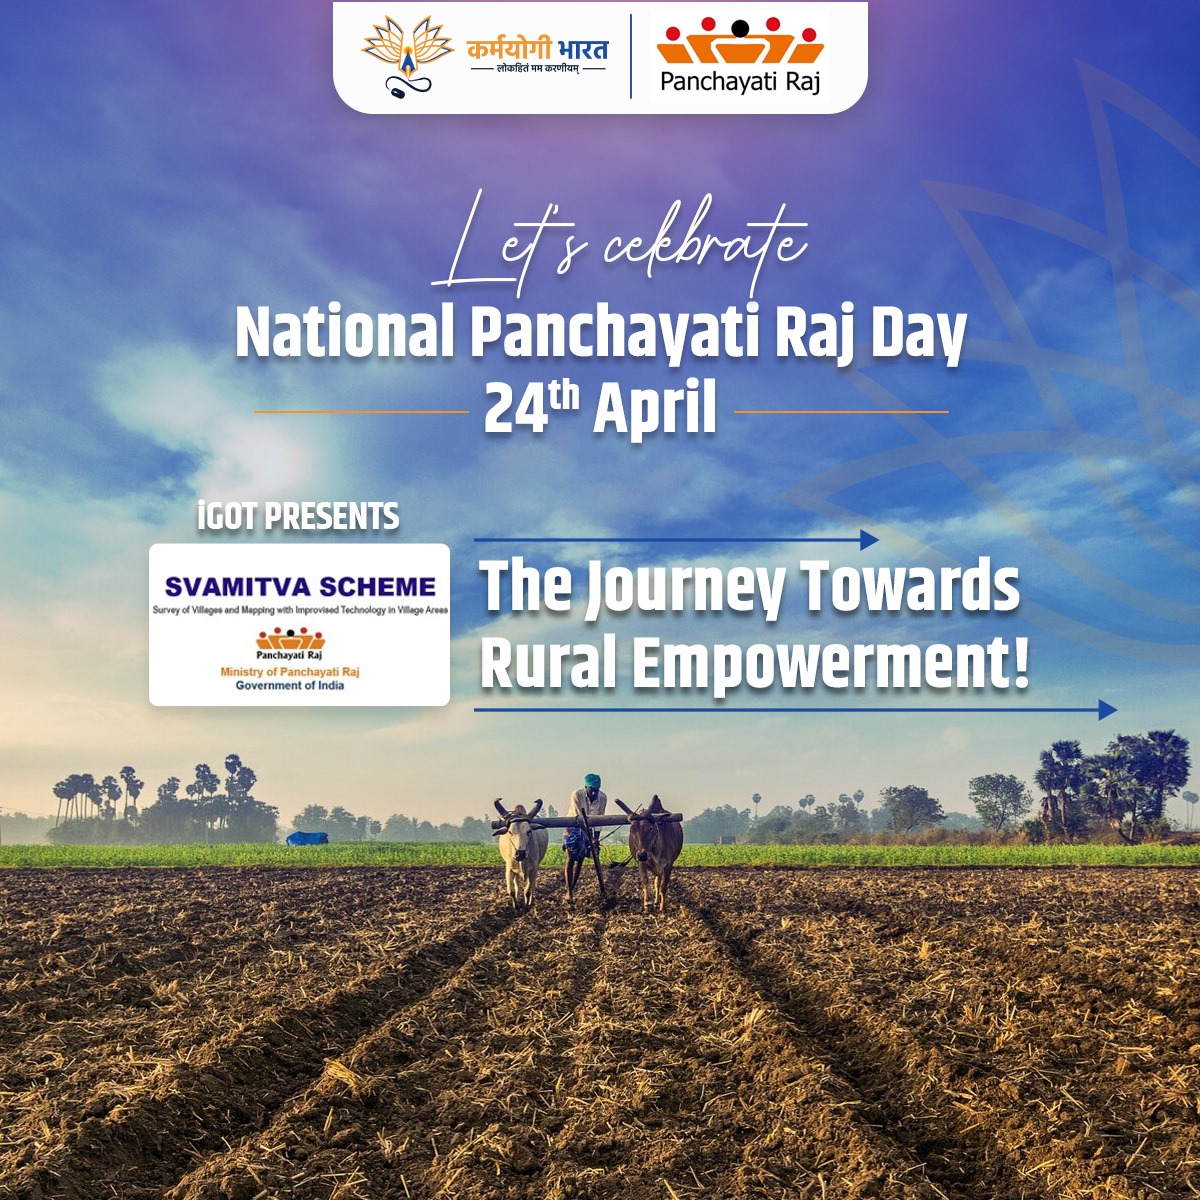 ‘The future of India lies in its villages’ - Mahatma Gandhi

On #NationalPanchayatiRaj Day, #iGOT brings a course on the ‘SVAMITVA’ scheme, covering the scheme’s fundamentals, objectives & its role in shaping the future of rural India - & contributing to an #AtmanirbharBharat.